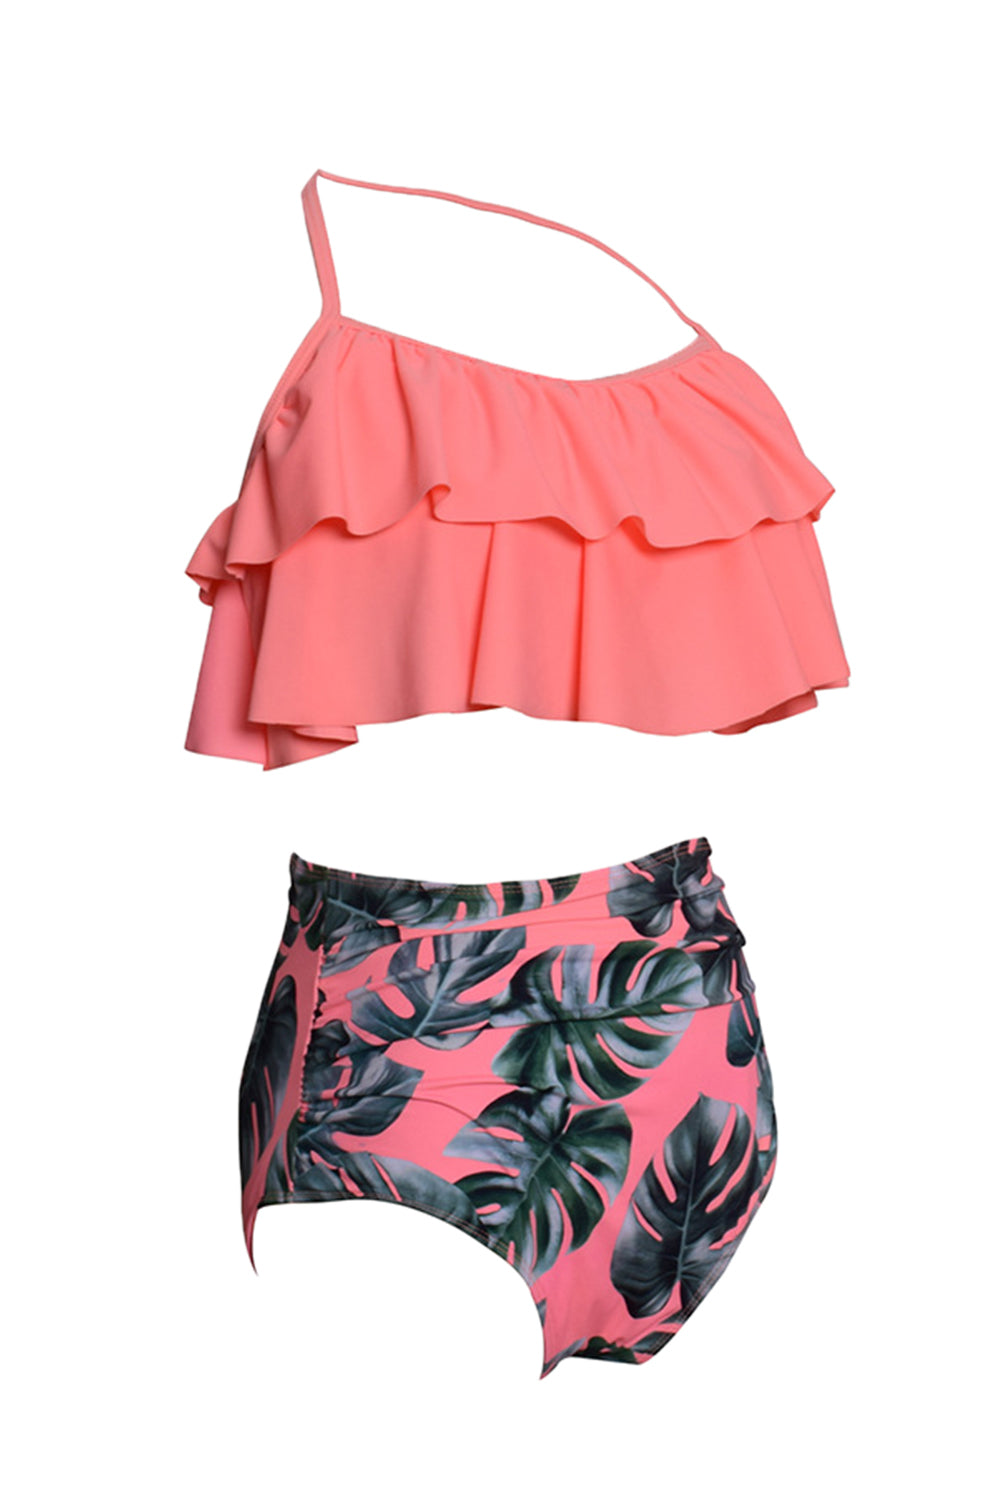 Iyasson Pink Vintage Falbala With High Waisted Bathing Suits